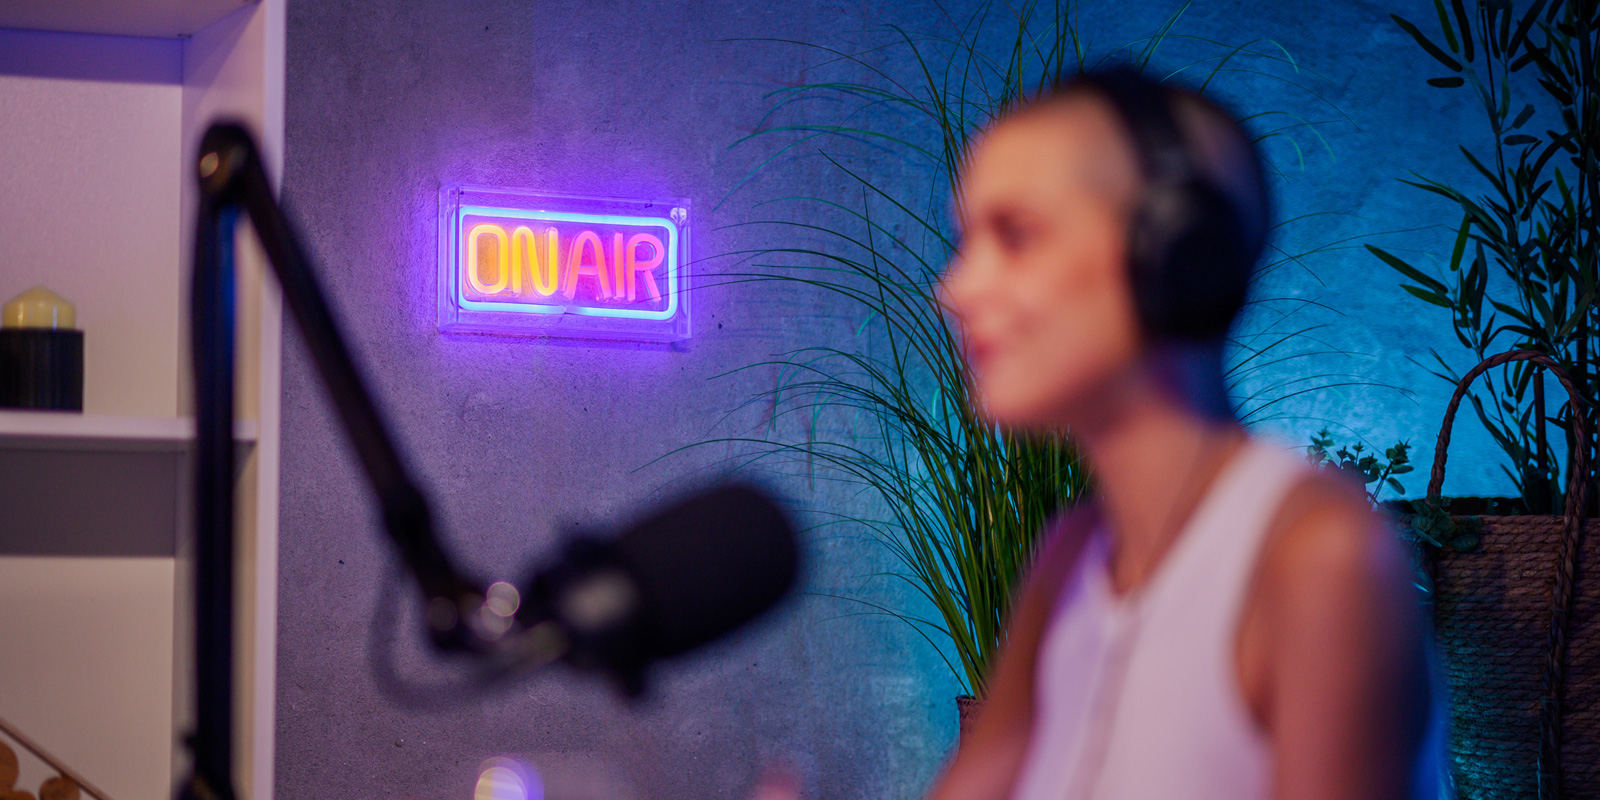 Woman recording a podcast with a microphone and a neon 'on air' sign in the background